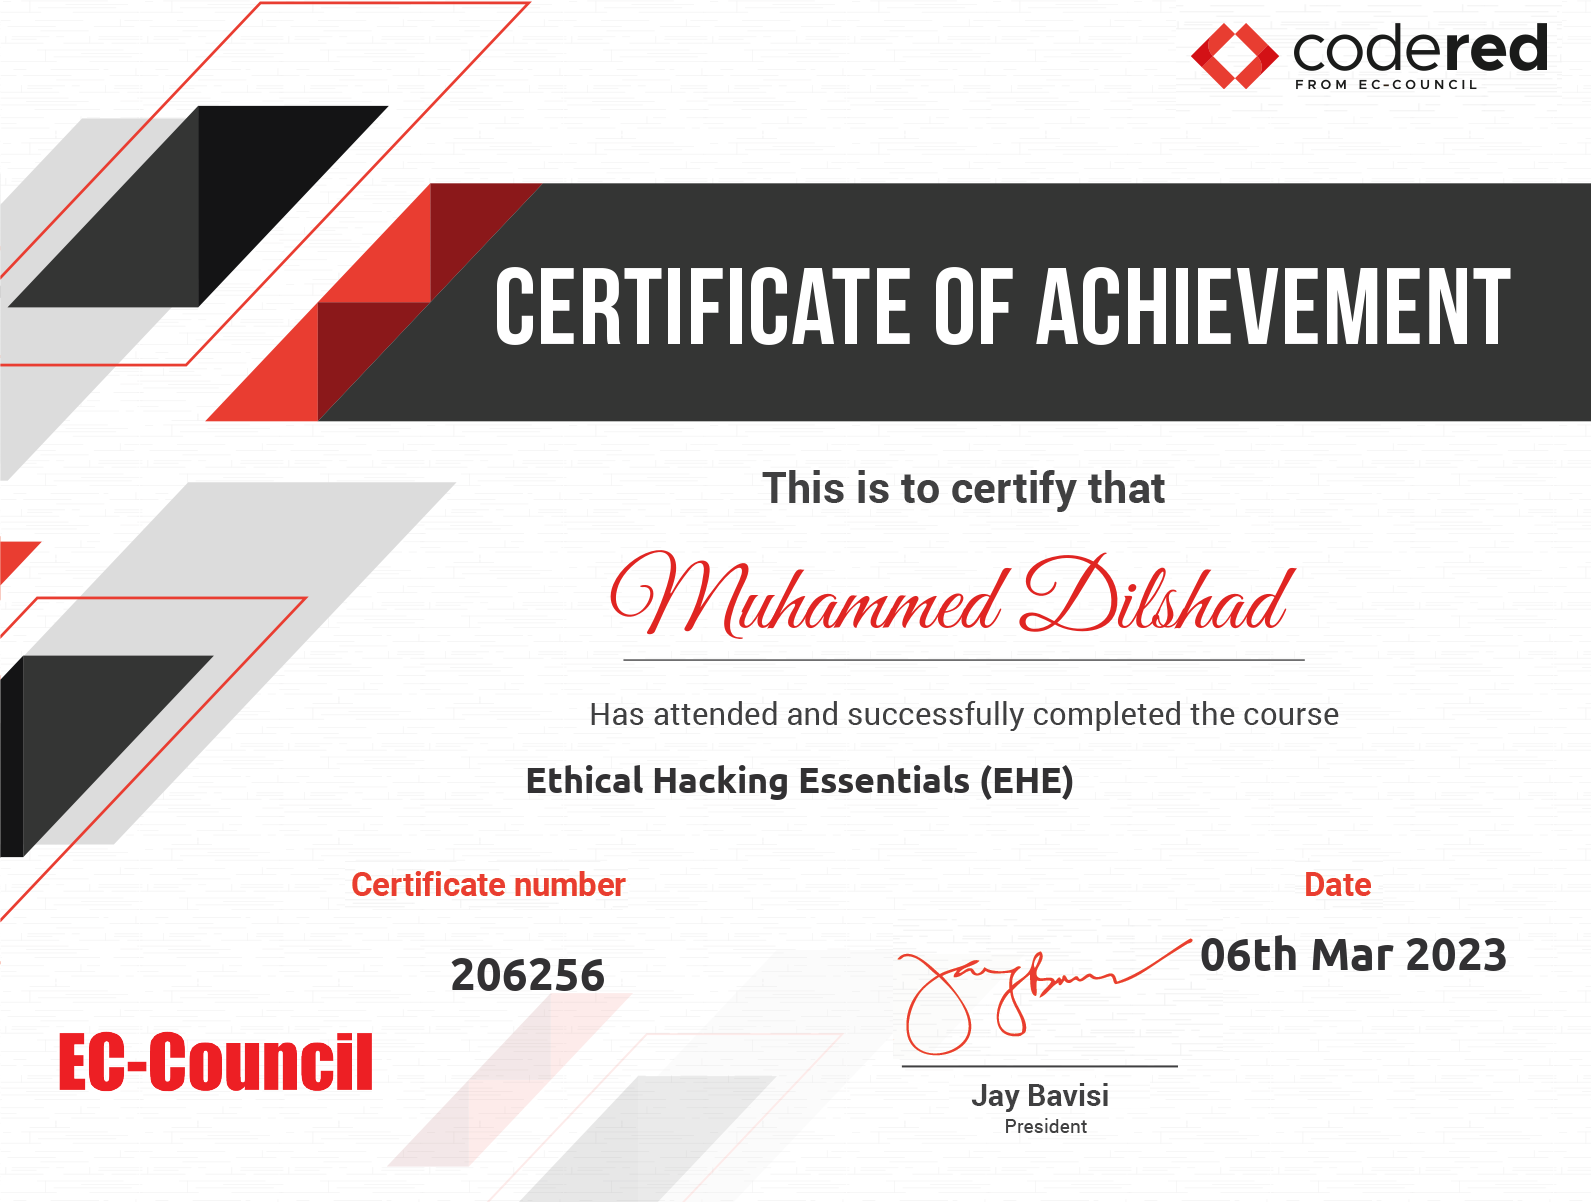 couNciL

> CERTIFICATE OF ACHIEVEMENT

This is to certify that

# O)Nlitemmed Dilstad

Has attended and successfully completed the course
Ethical Hacking Essentials (EHE)
Certificate number Date

206256 SE Mar 2023

Jay Bavisi

President